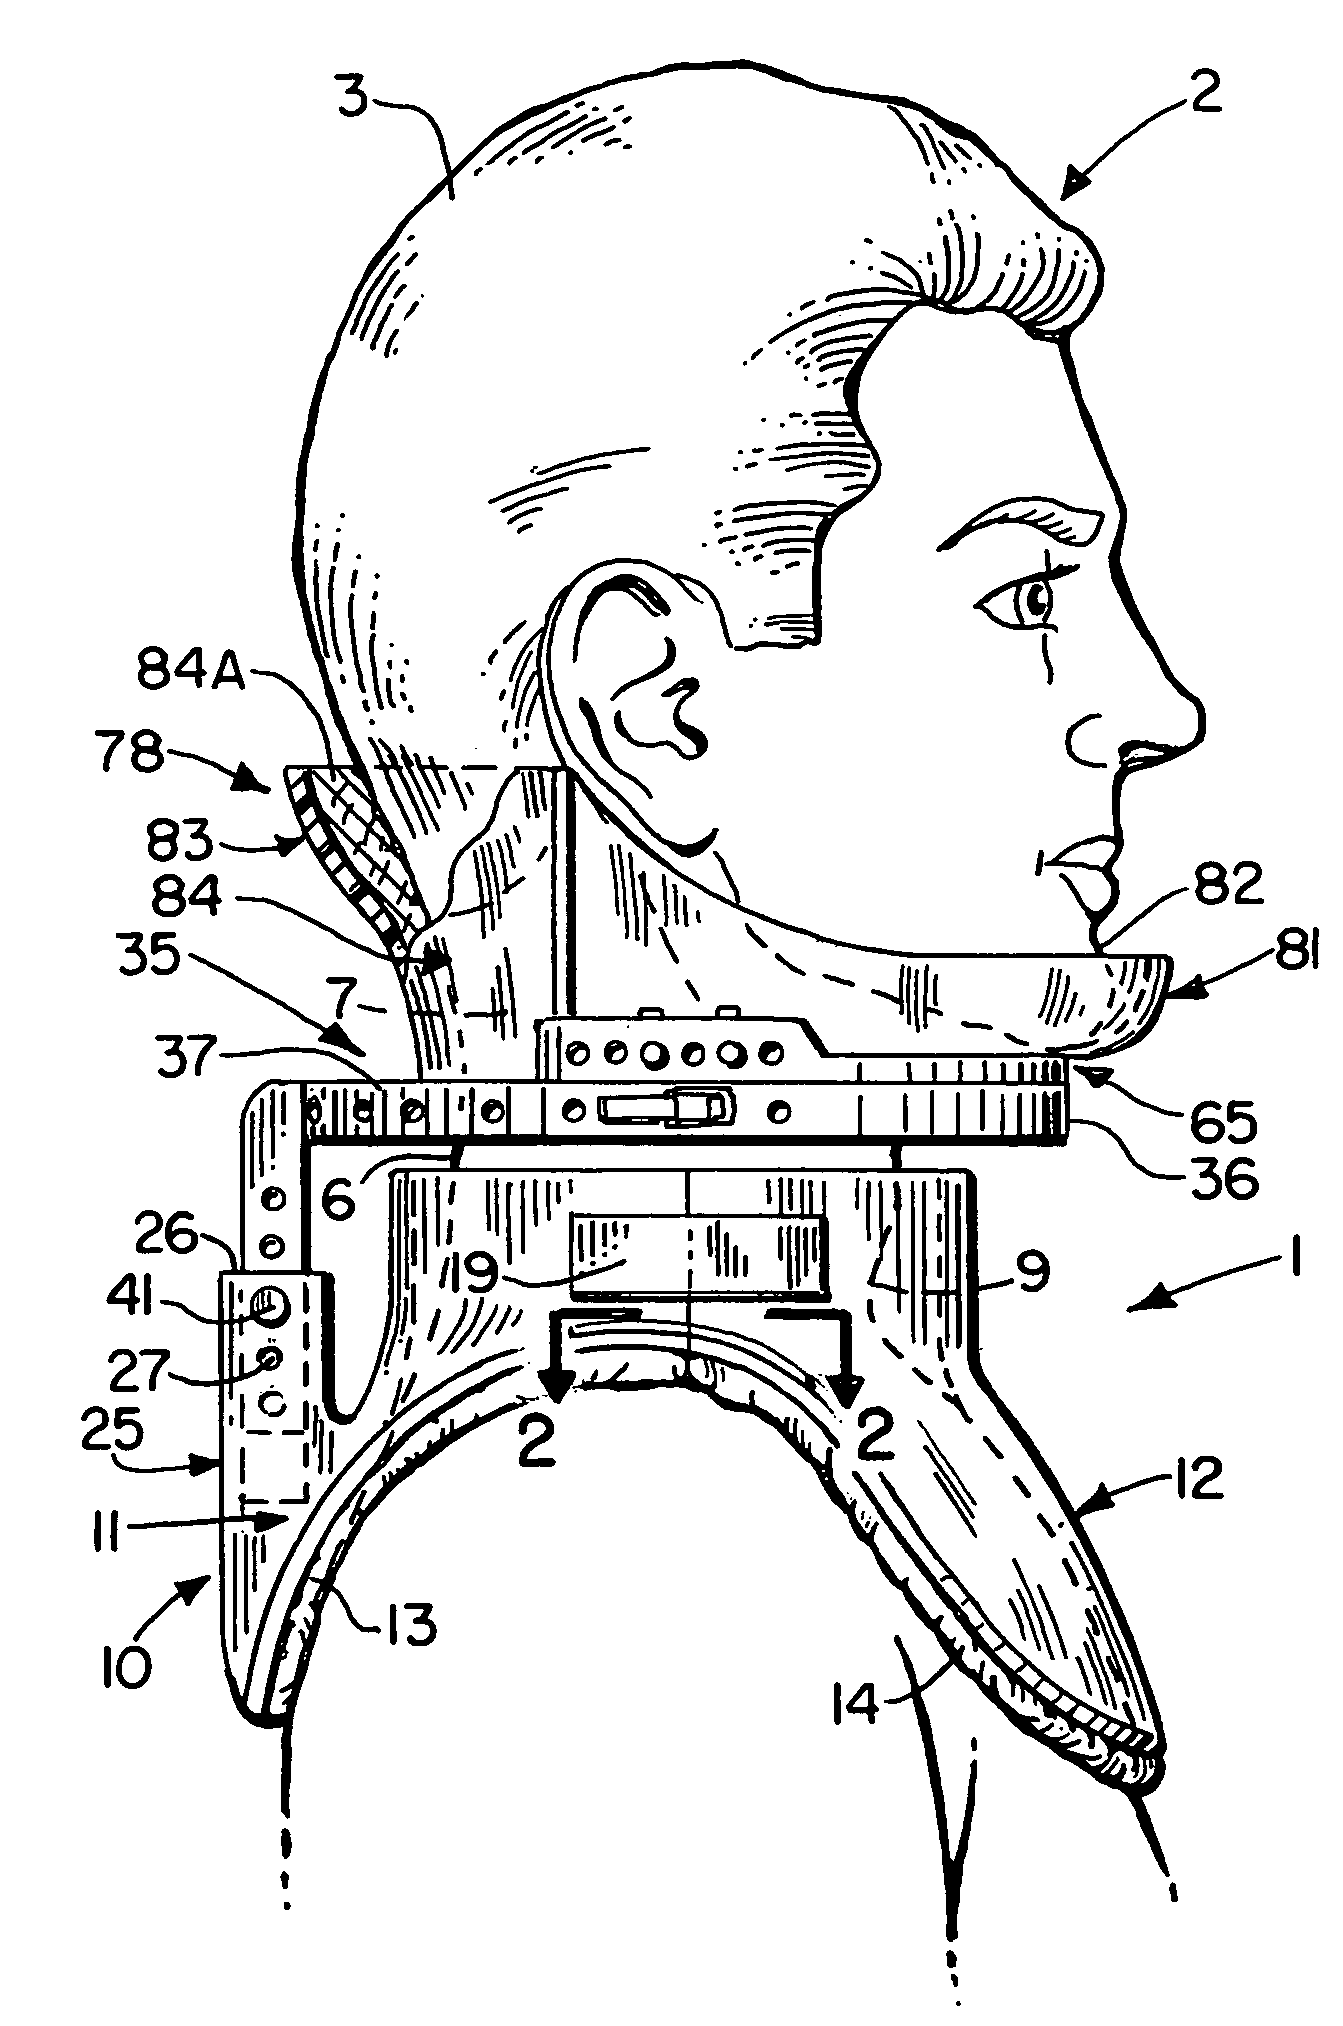 Cervical brace and therapy device